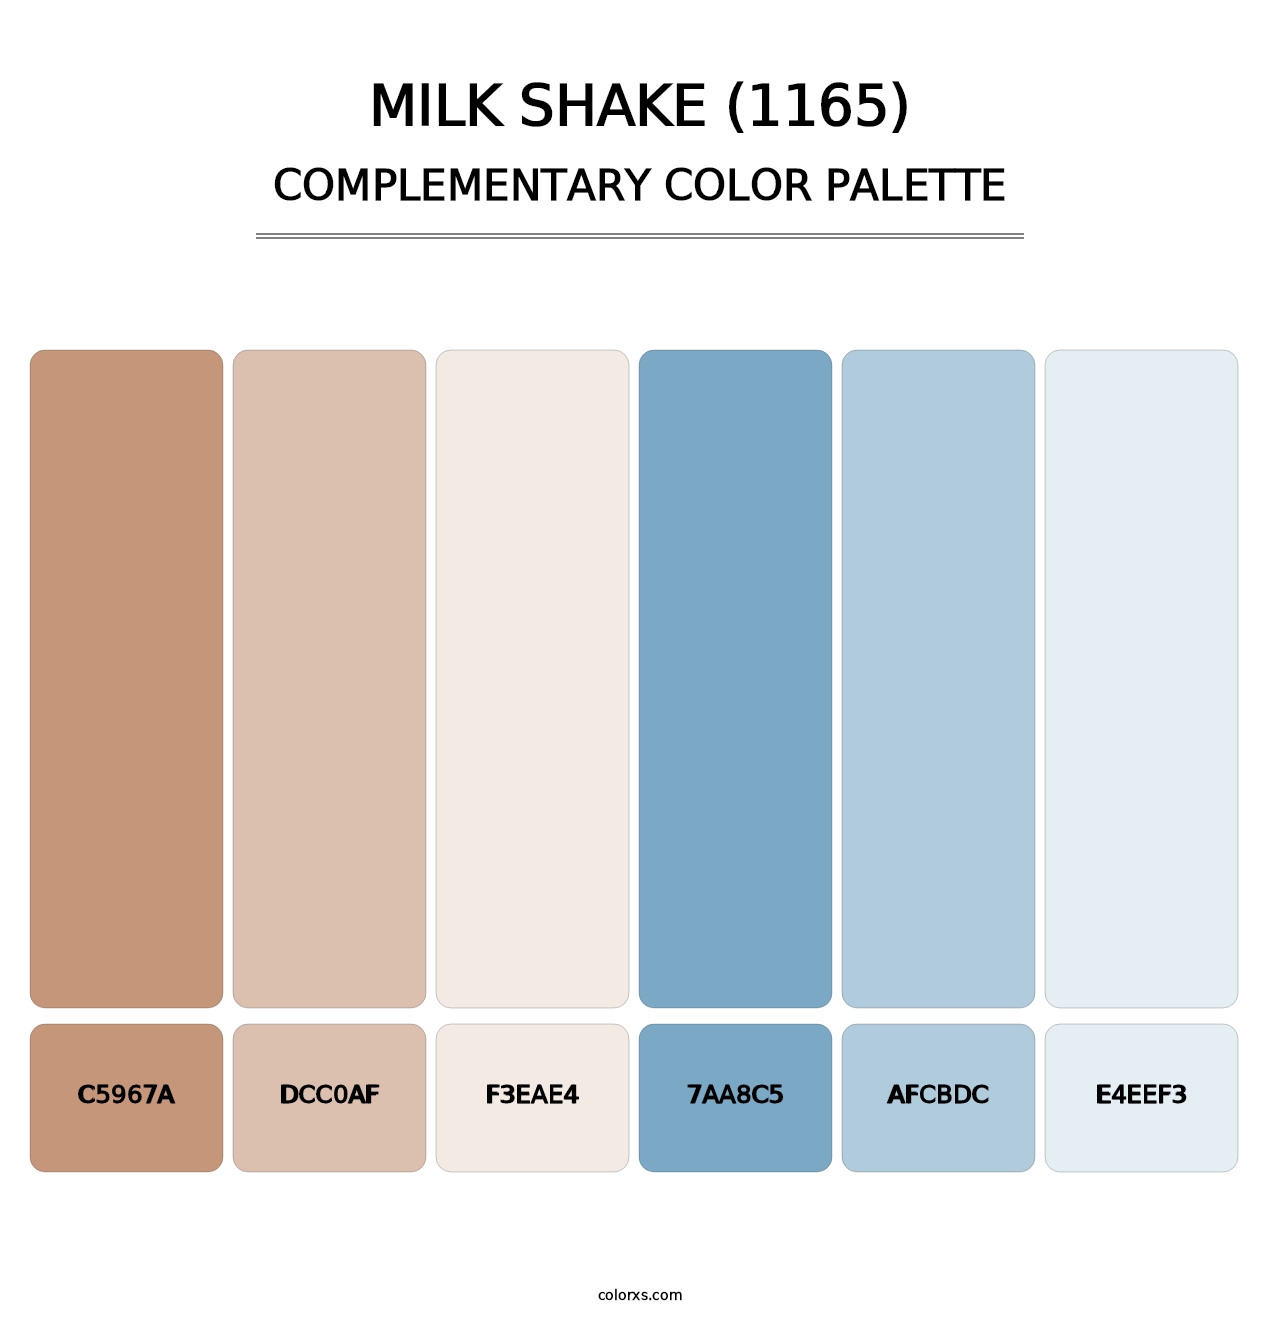 Milk Shake (1165) - Complementary Color Palette